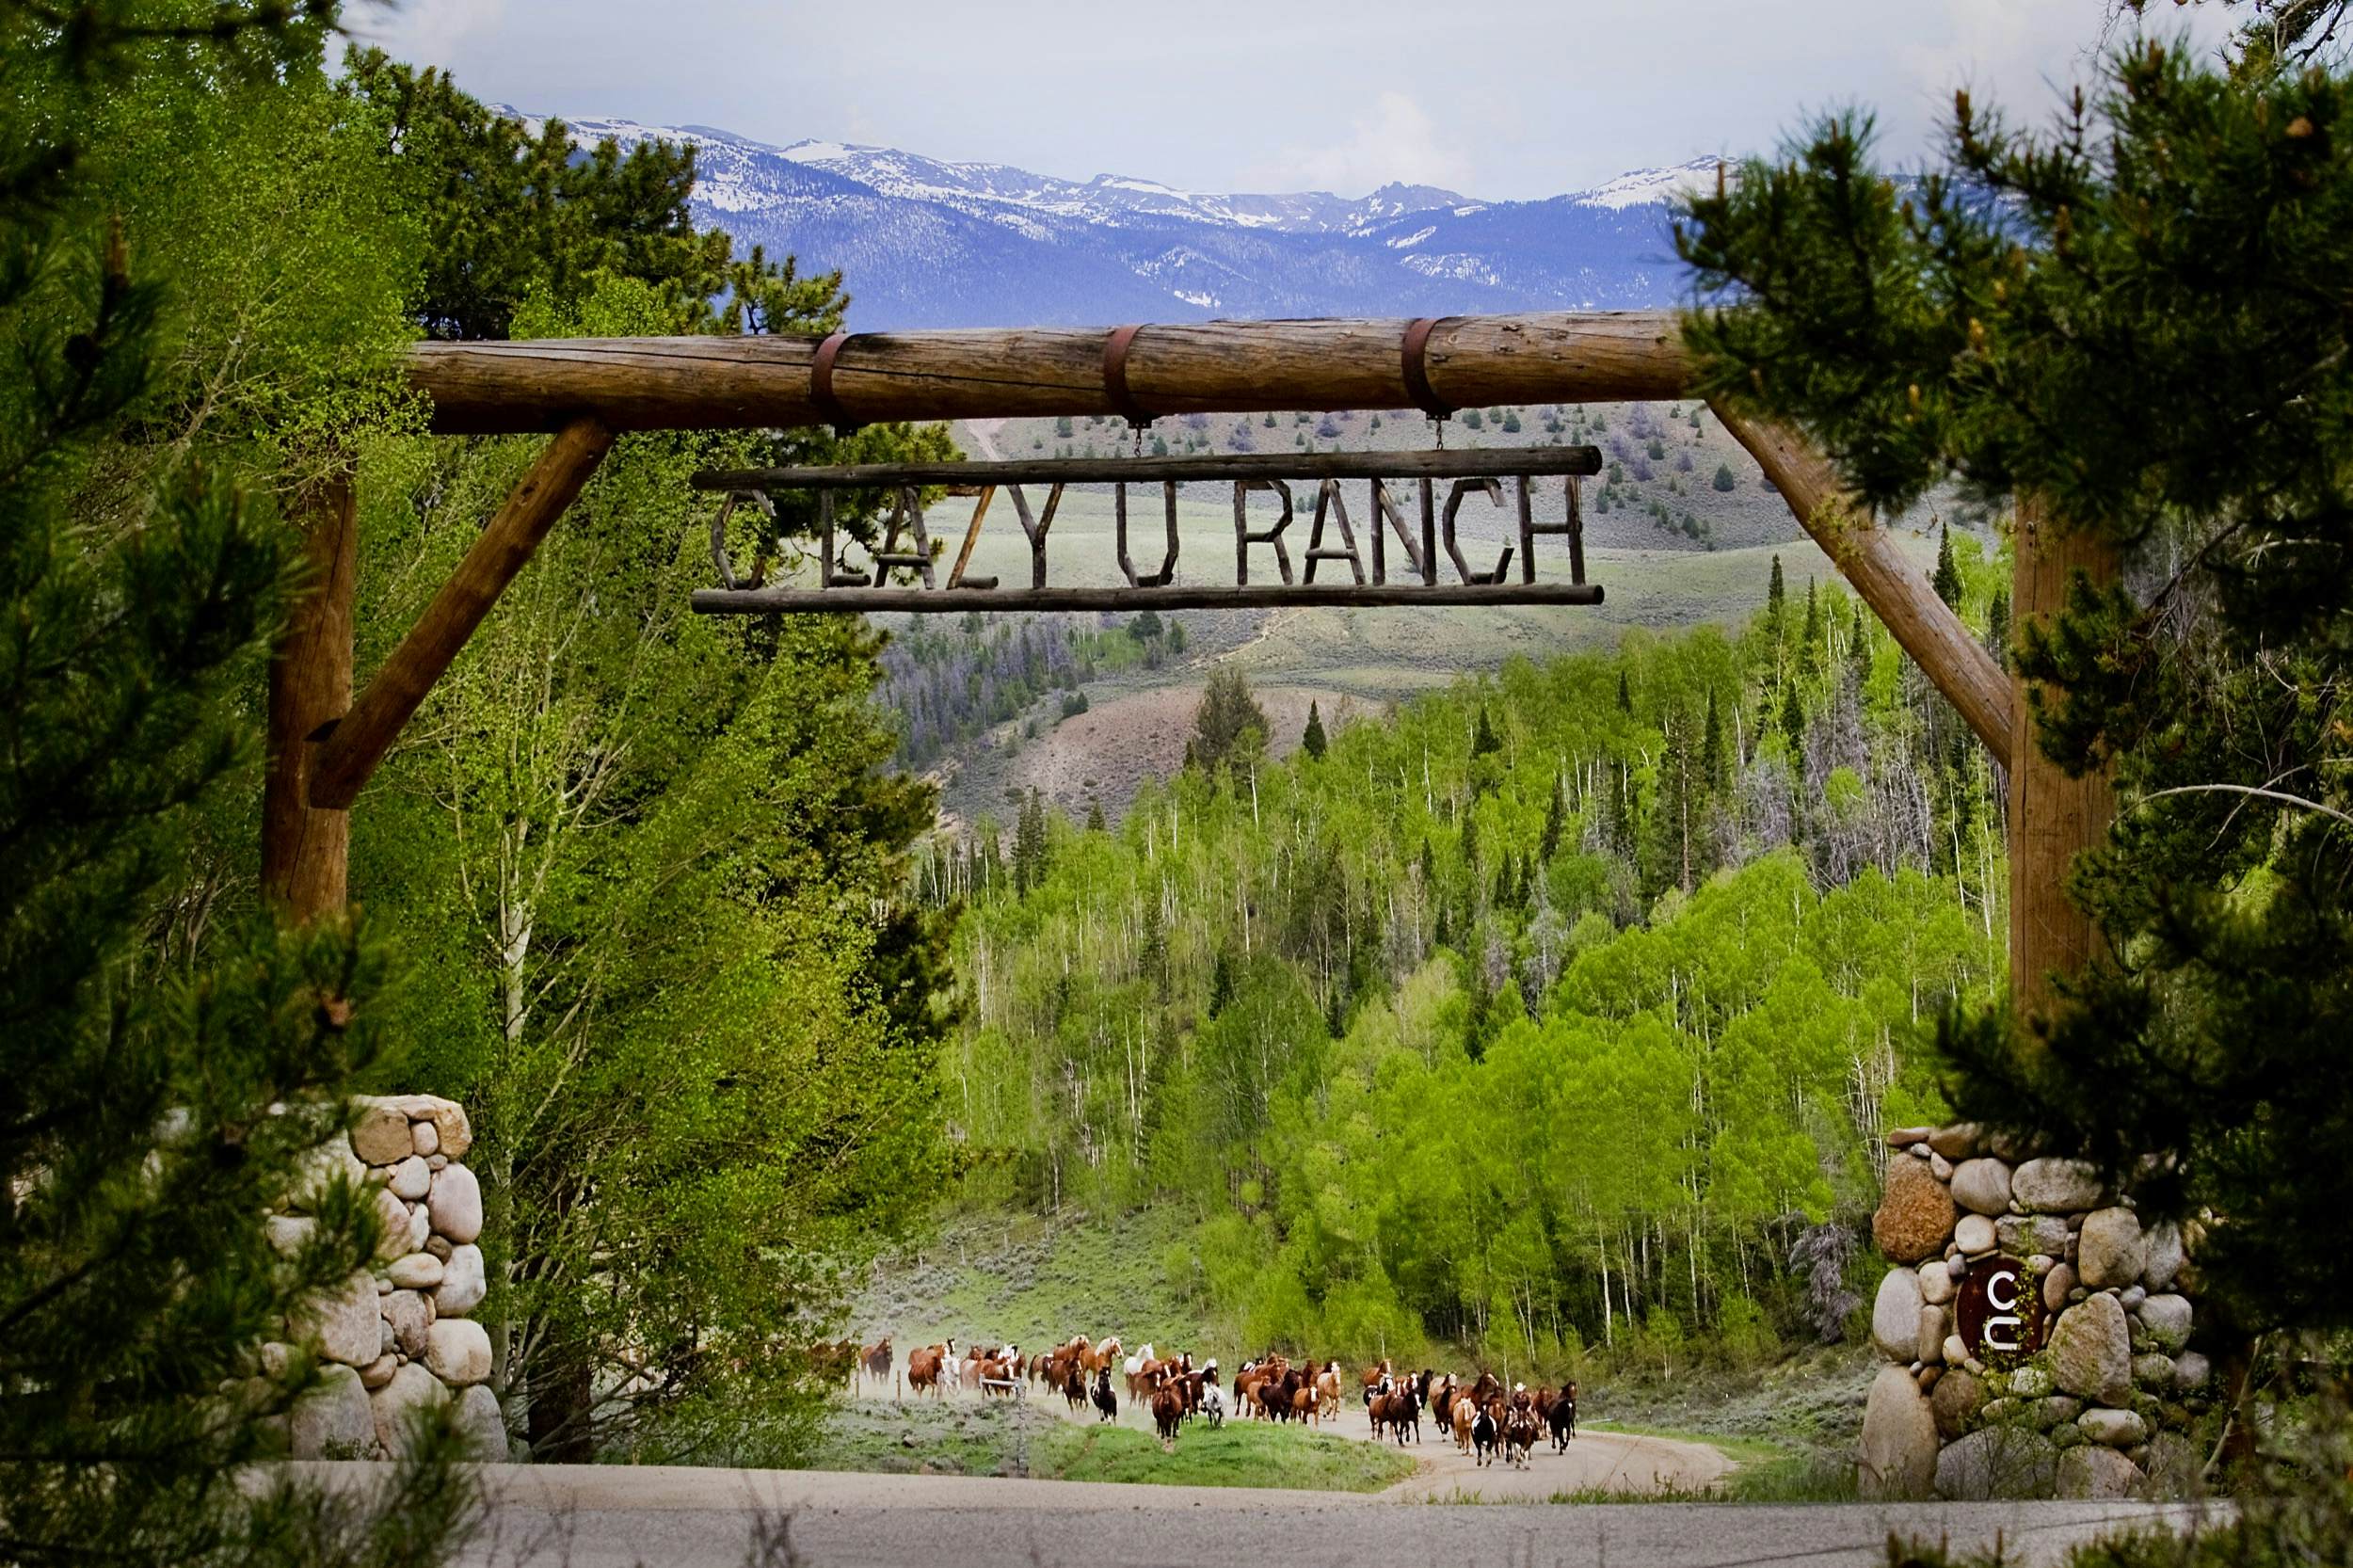 C Lazy U dude ranch celebrates its 100th anniversary in luxury - Lonely  Planet